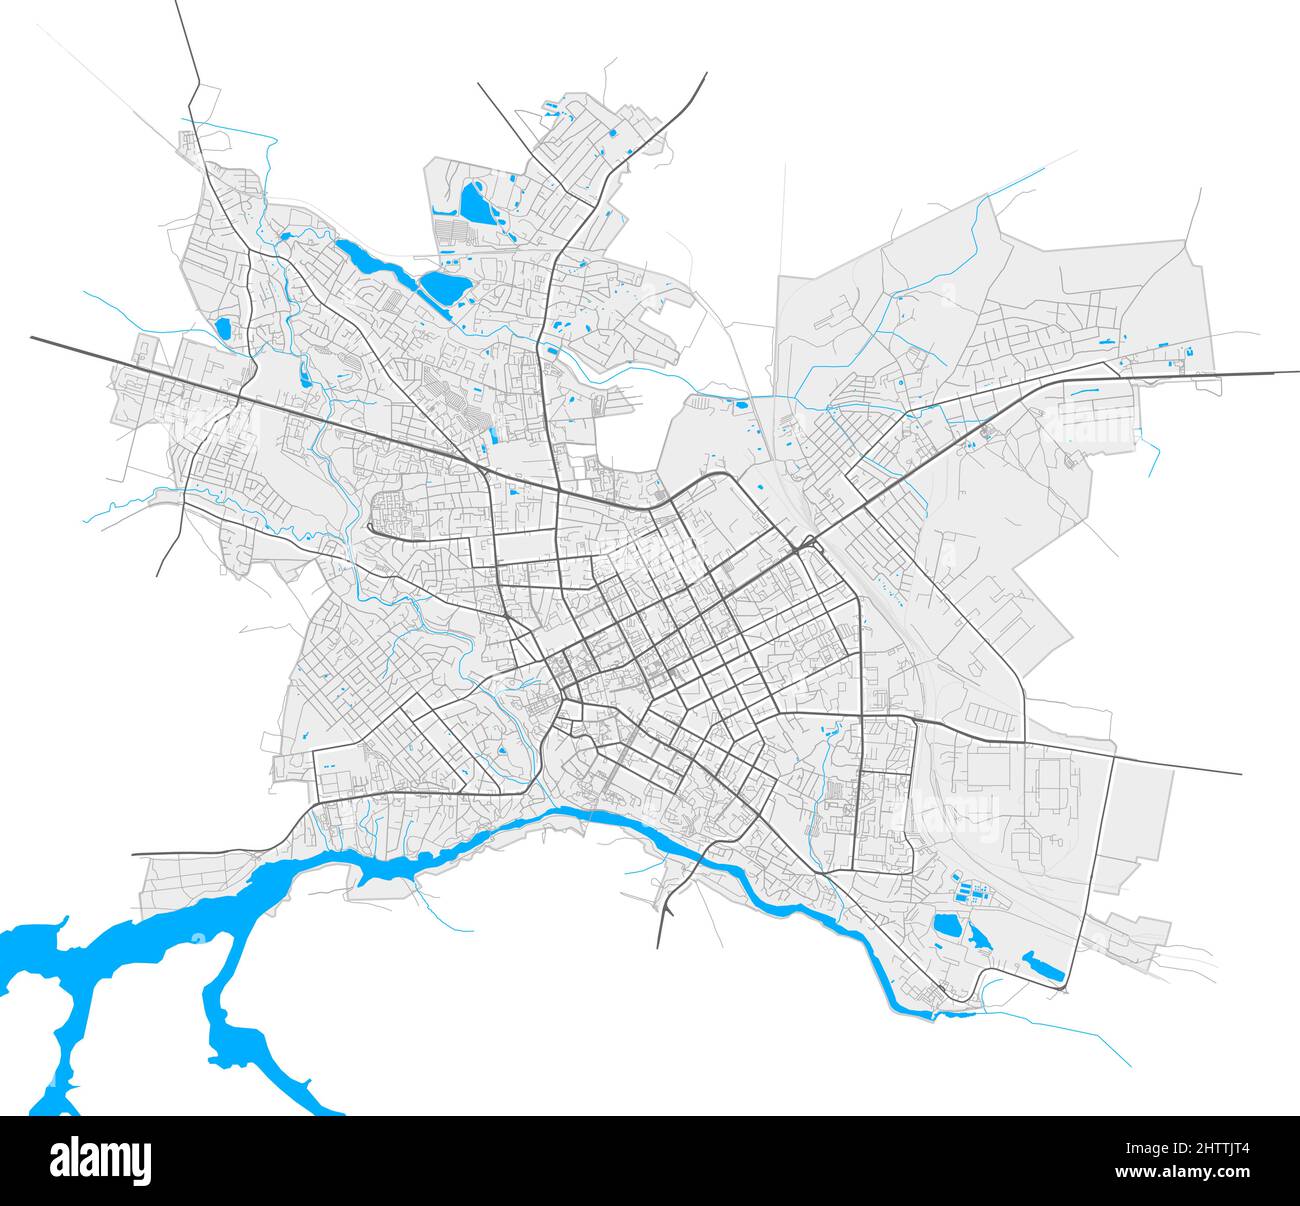 Zhytomyr, Zhytomyr Oblast, Ukraine high resolution vector map with city boundaries and outlined paths. White additional outlines for main roads. Many Stock Vector